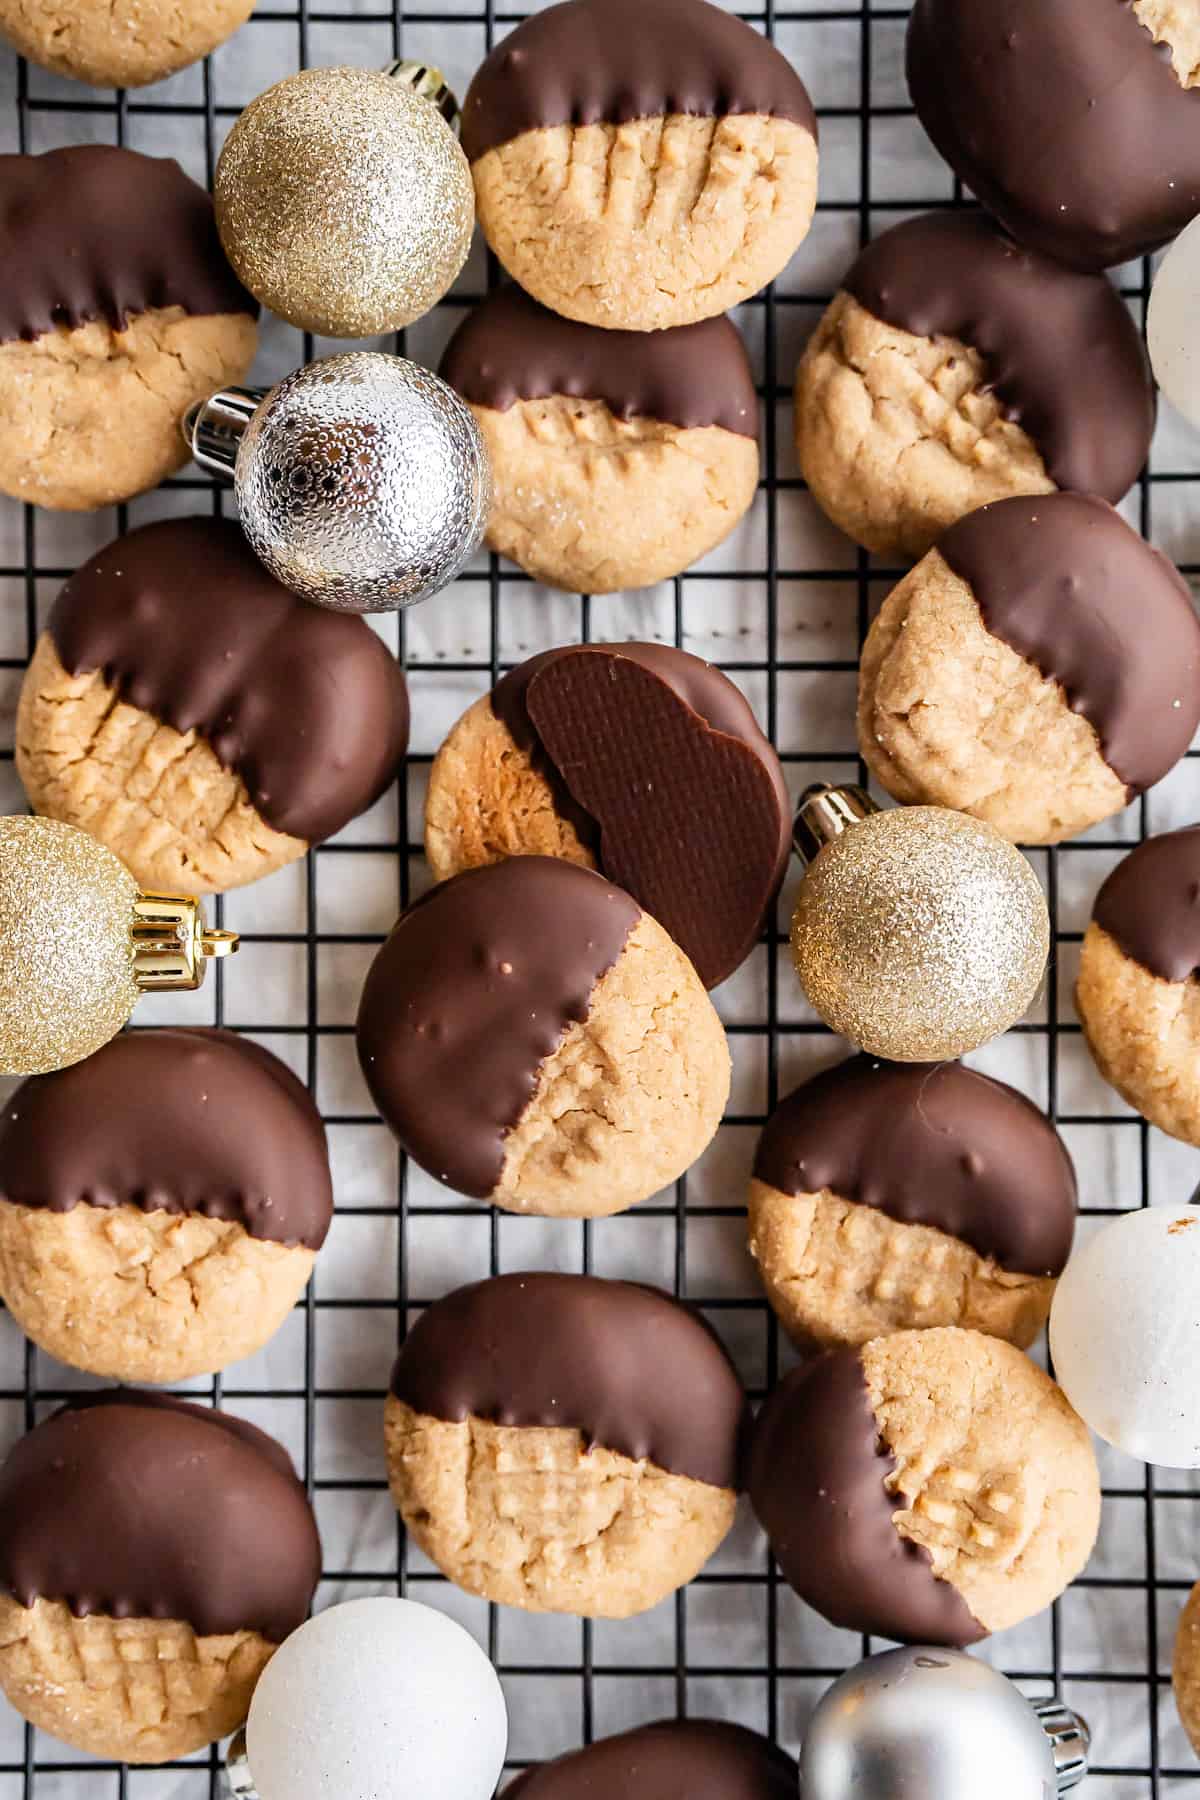 Decoratively arranged gluten-free peanut butter cookies dipped in chocolate.